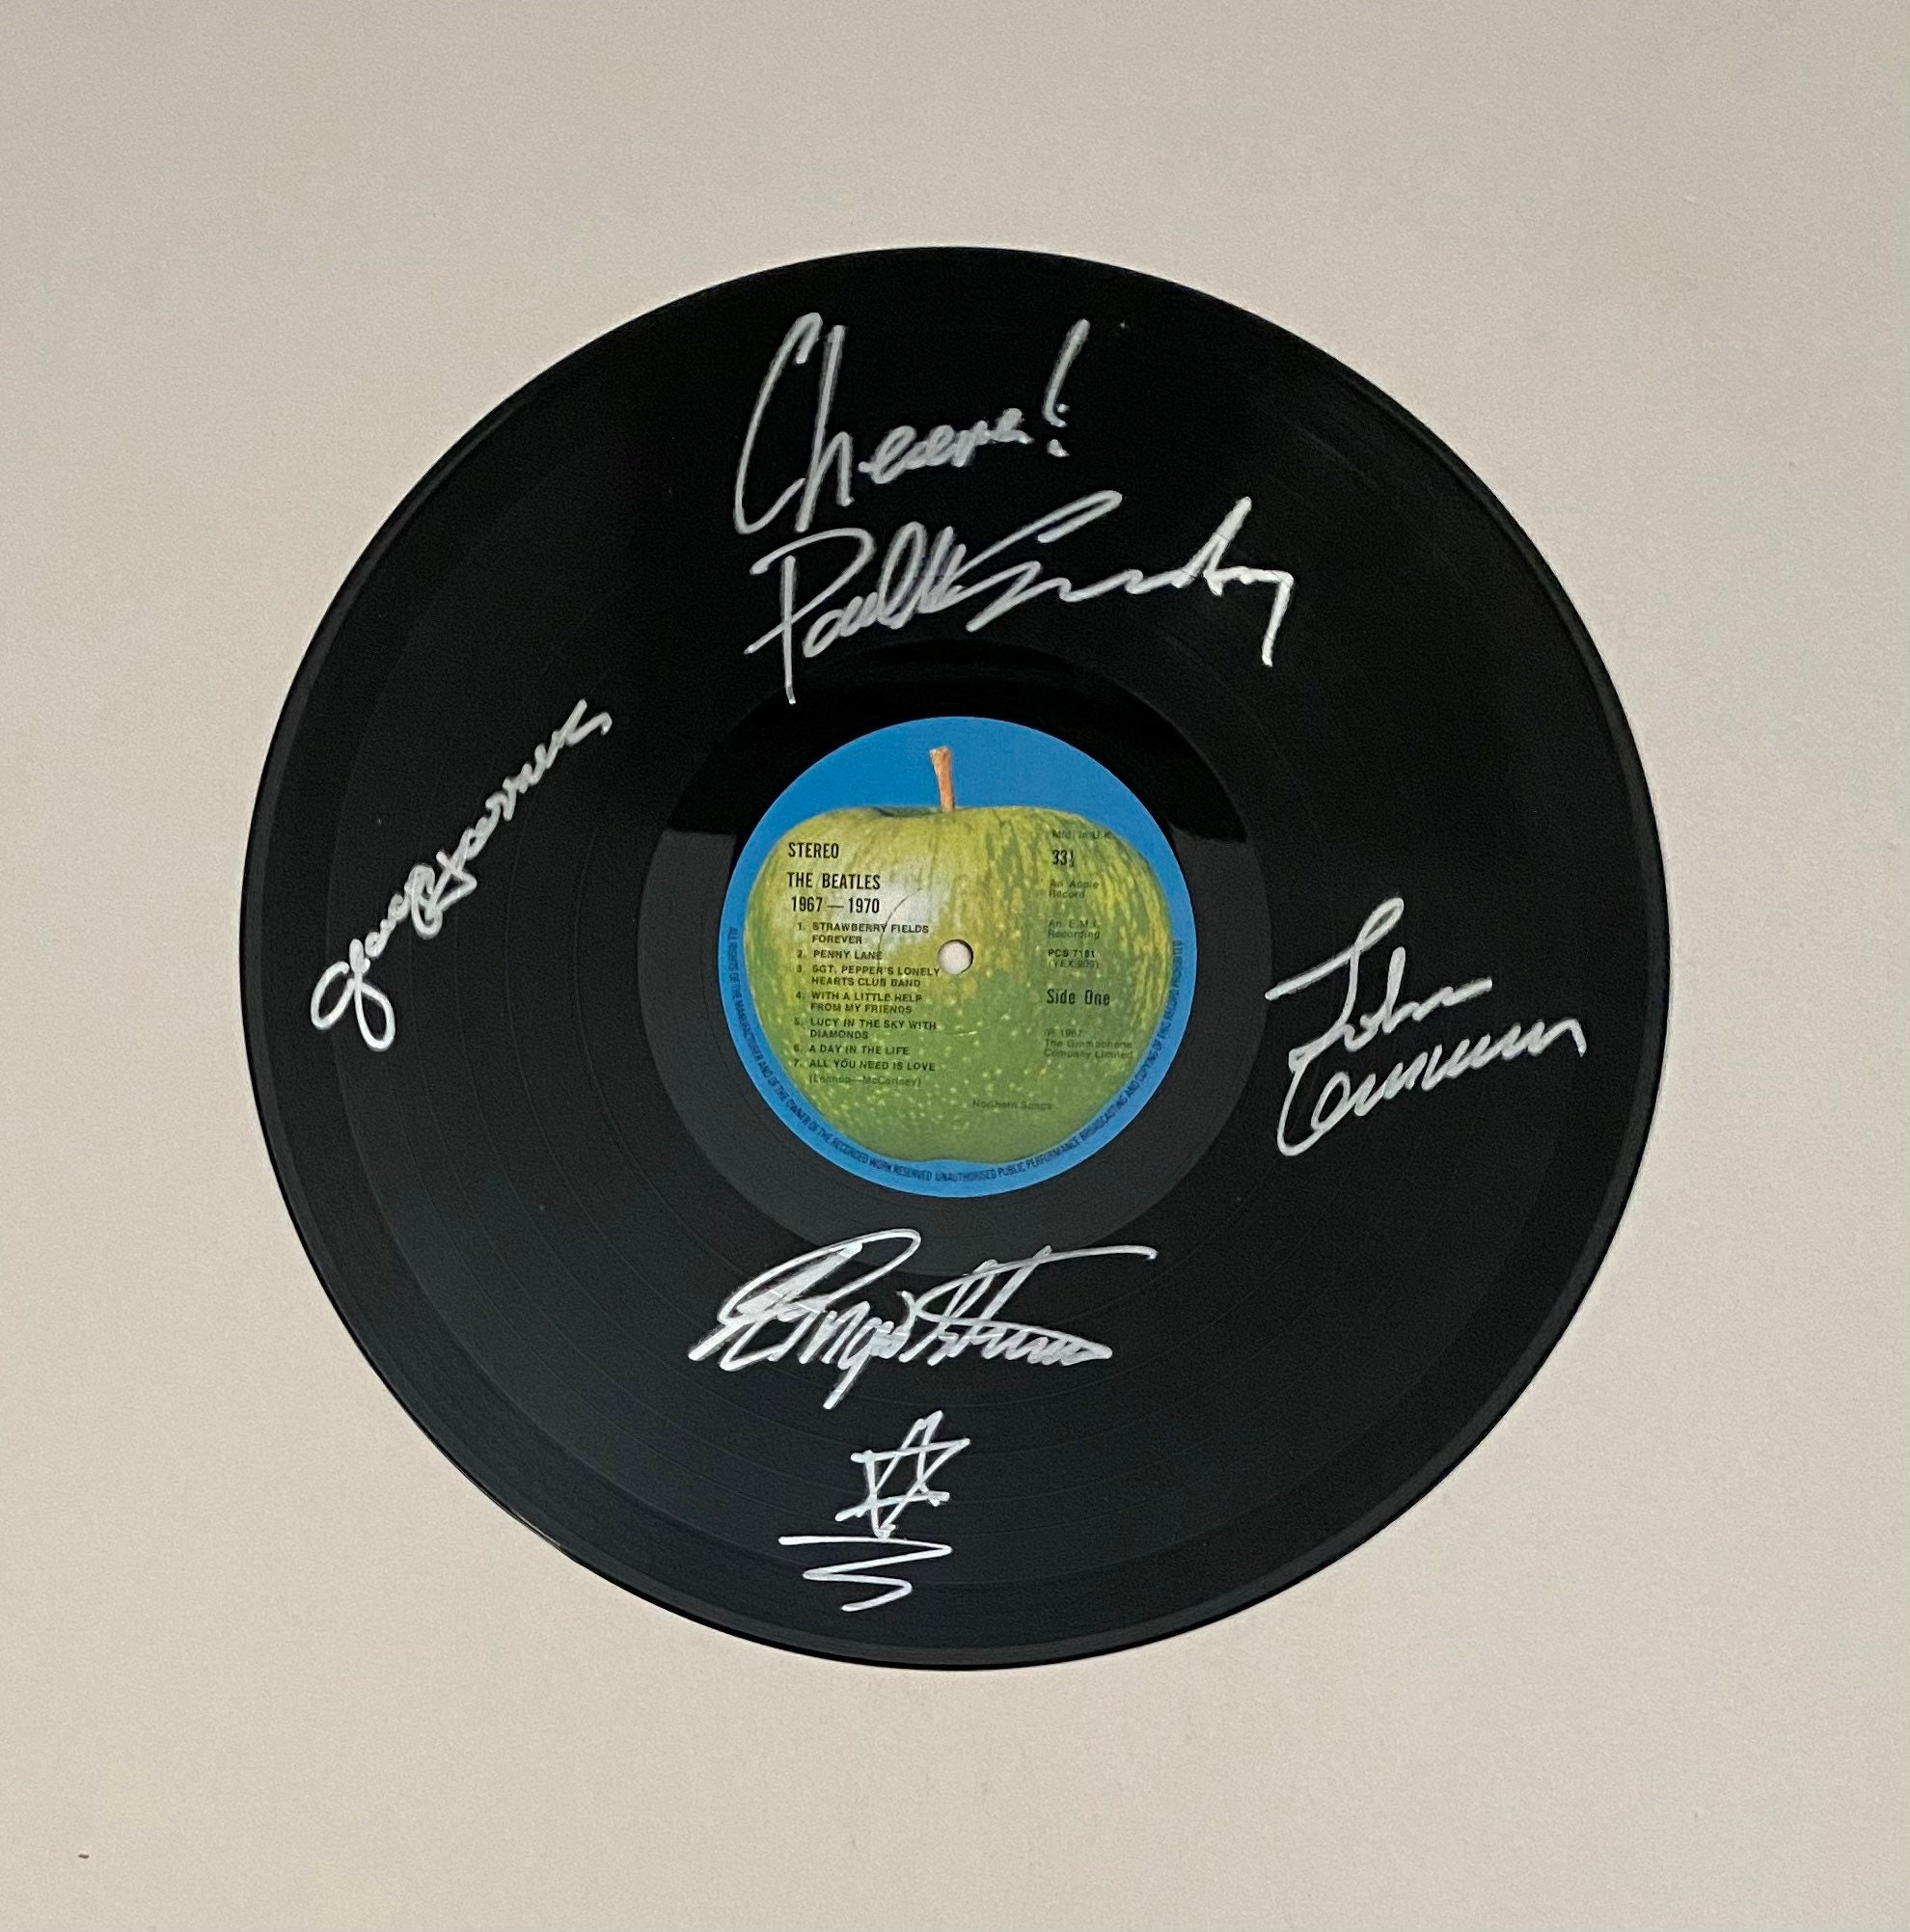 The Beatles Signed Vinyl Record